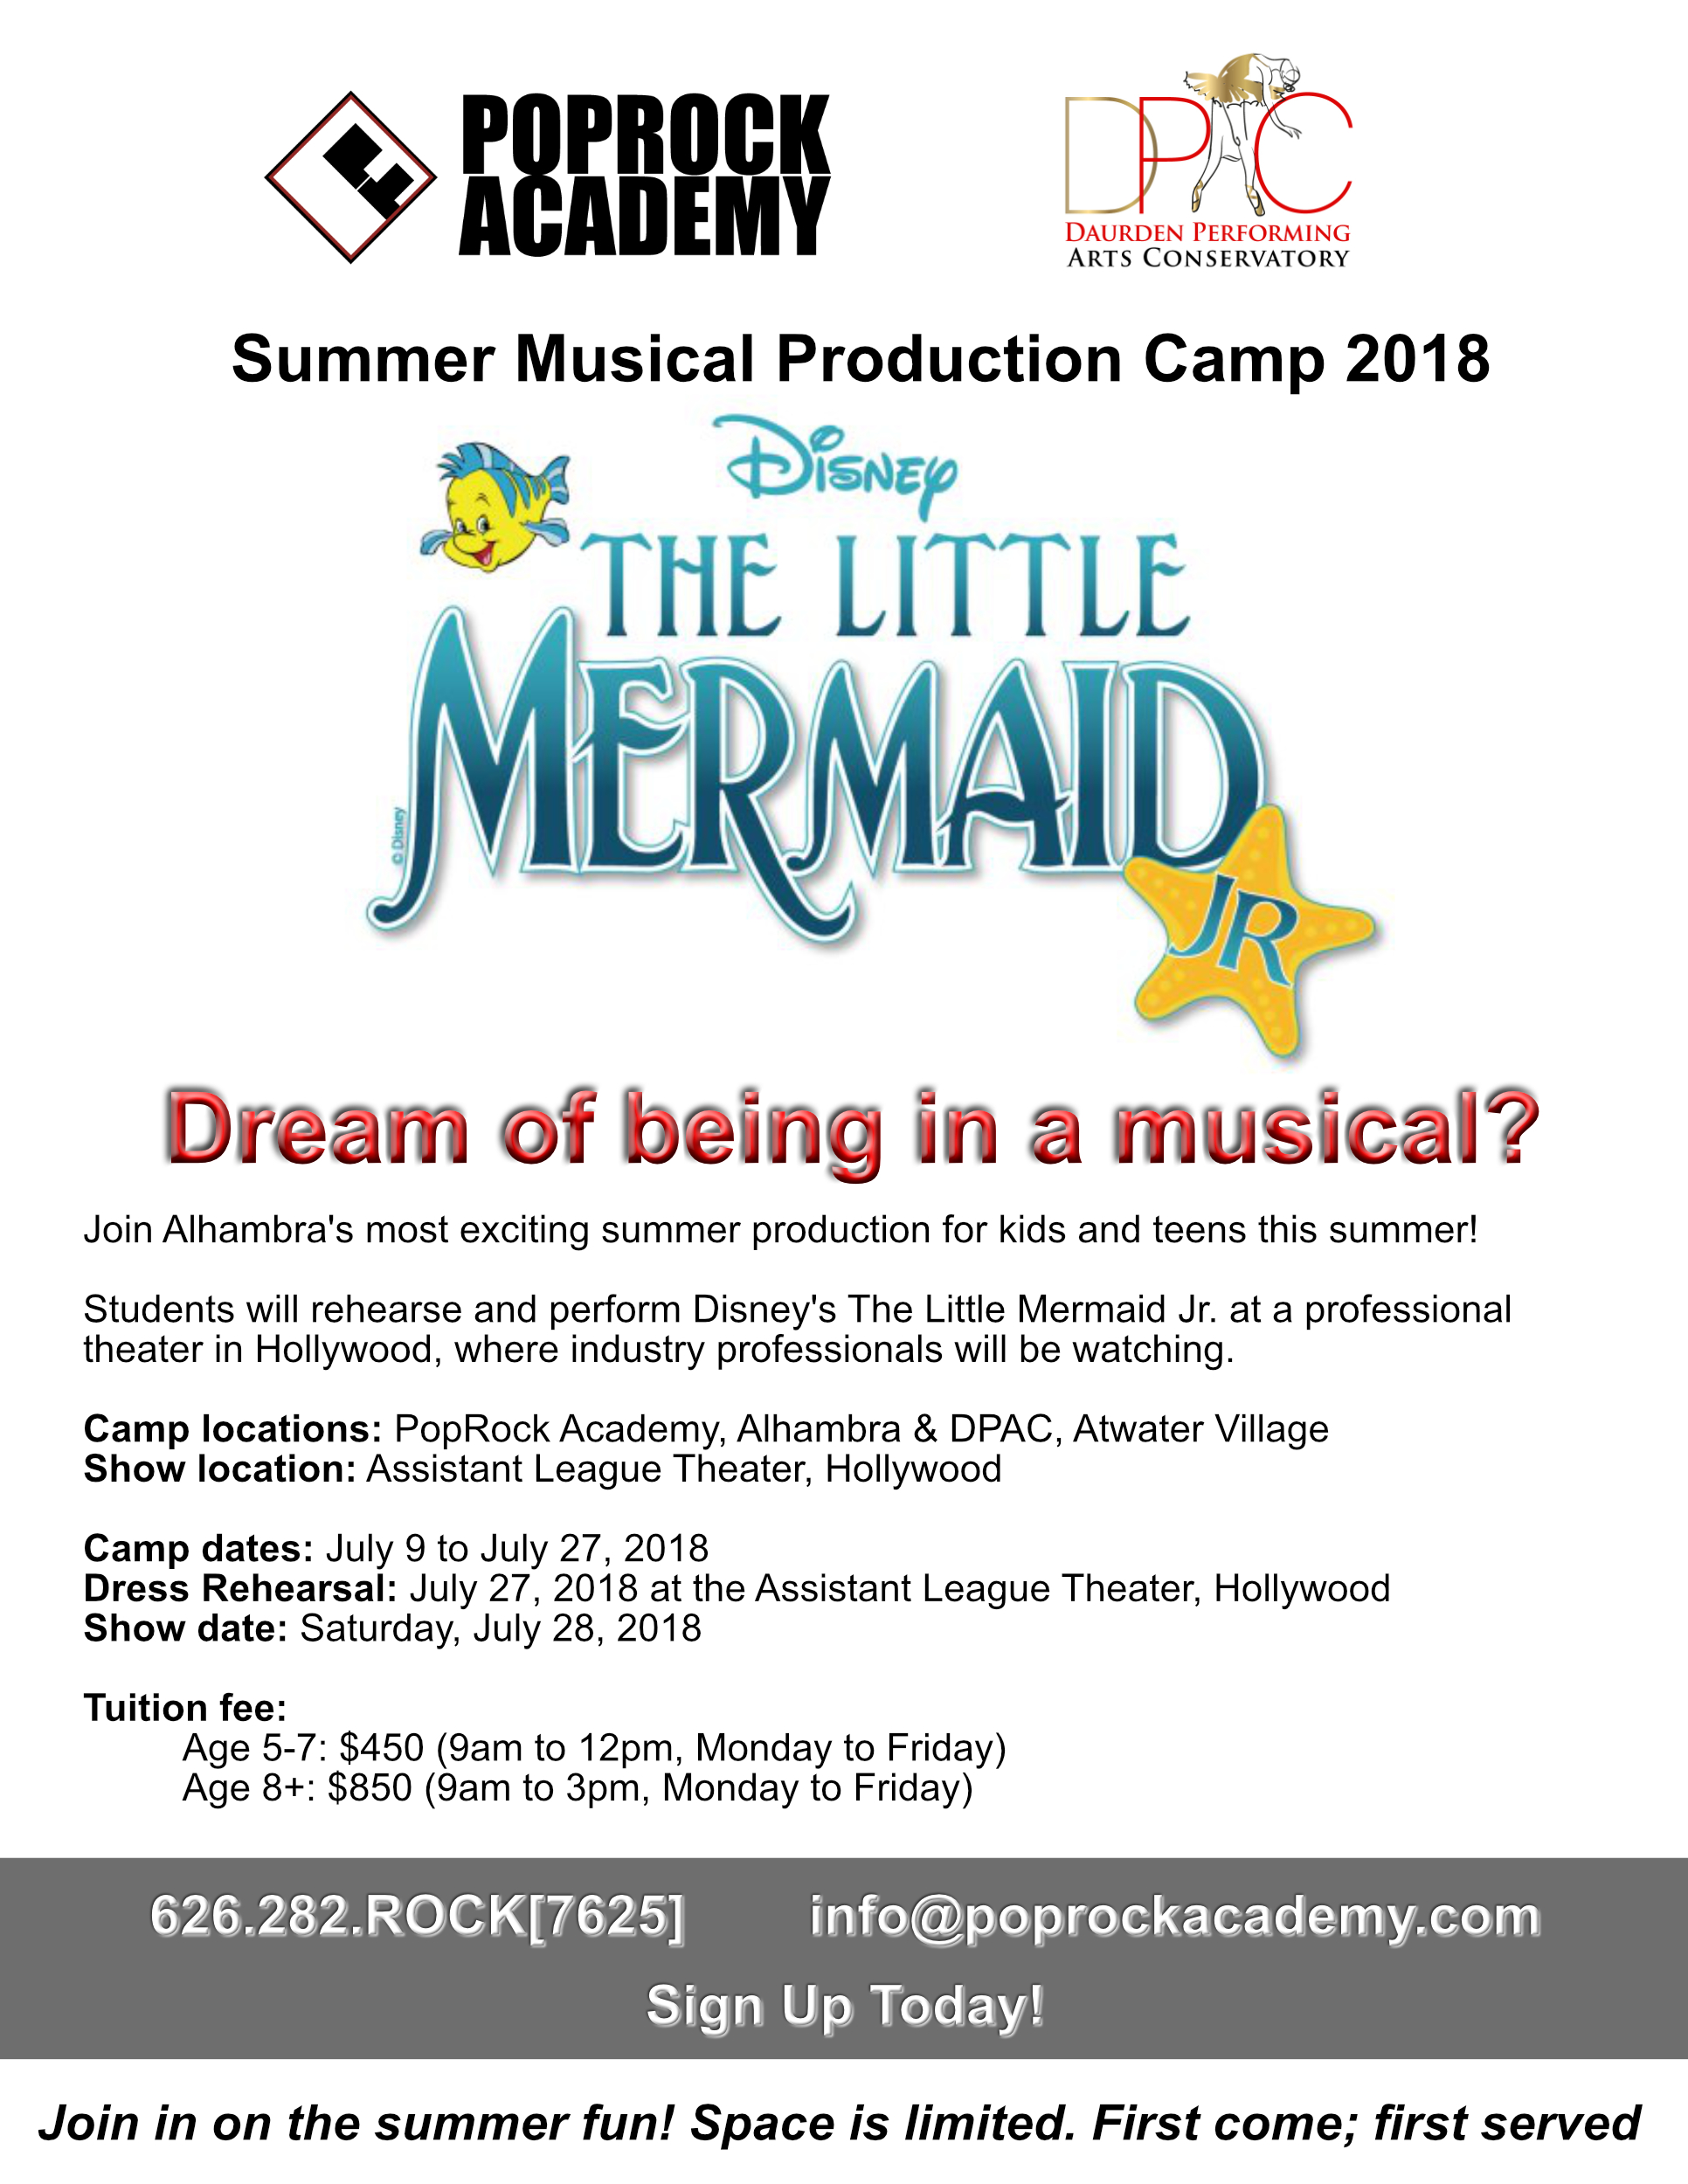 The Little Mermaid Jr. Production in Alhambra